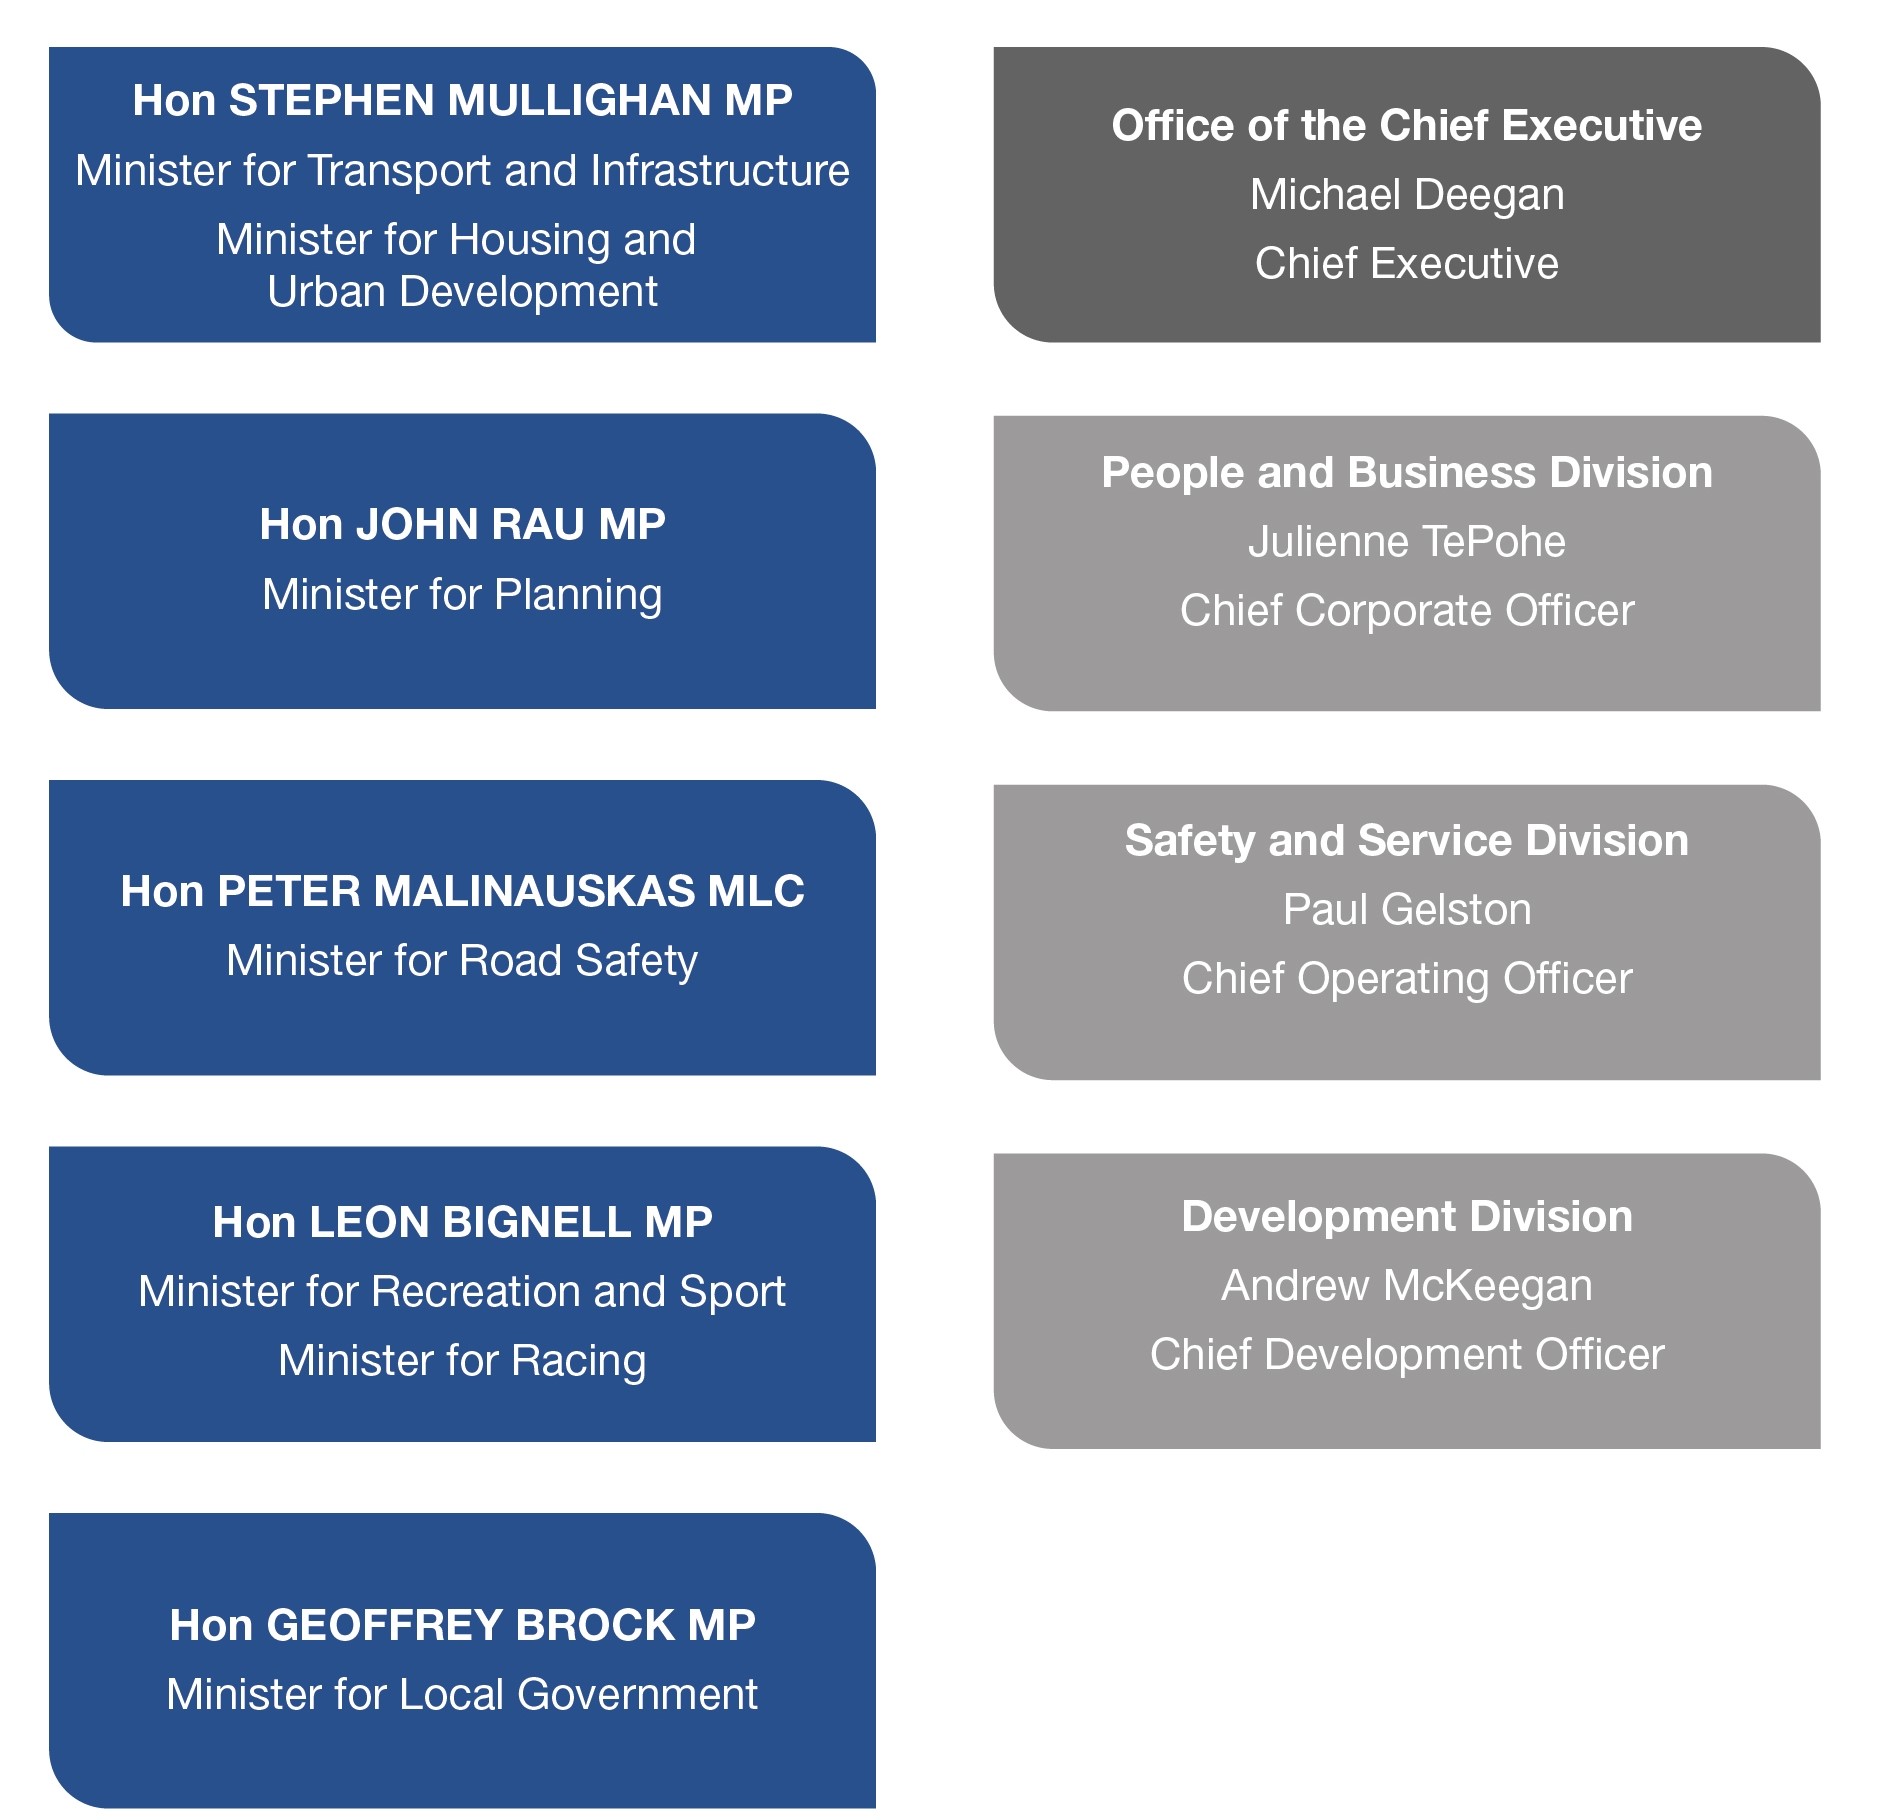 DIT's Organisation Chart. Ministers: Hon Stephen Mullighan MP (Minister for Transport and Infrastructure, Minister for Housing and Urban Development), Hon John Rau MP (Minister for Planning), Hon Peter Malinauskas MLC (Minister for Road Safety), Hon Leon Bignell MP (Minister for Recreation and Sport, Minister for Racing), Hon Geoffery Brock MP (Minister for Local Government). Divisions: Office for the Chief Executive (Michael Deegan - Chief Executive), People and Business Division (Julienne TePohe - Chief Corporate Officer), Safety and Service Division (Paul Gelston - Chief Operating Officer), Development Division (Andrew McKeegan - Chief Development Officer)